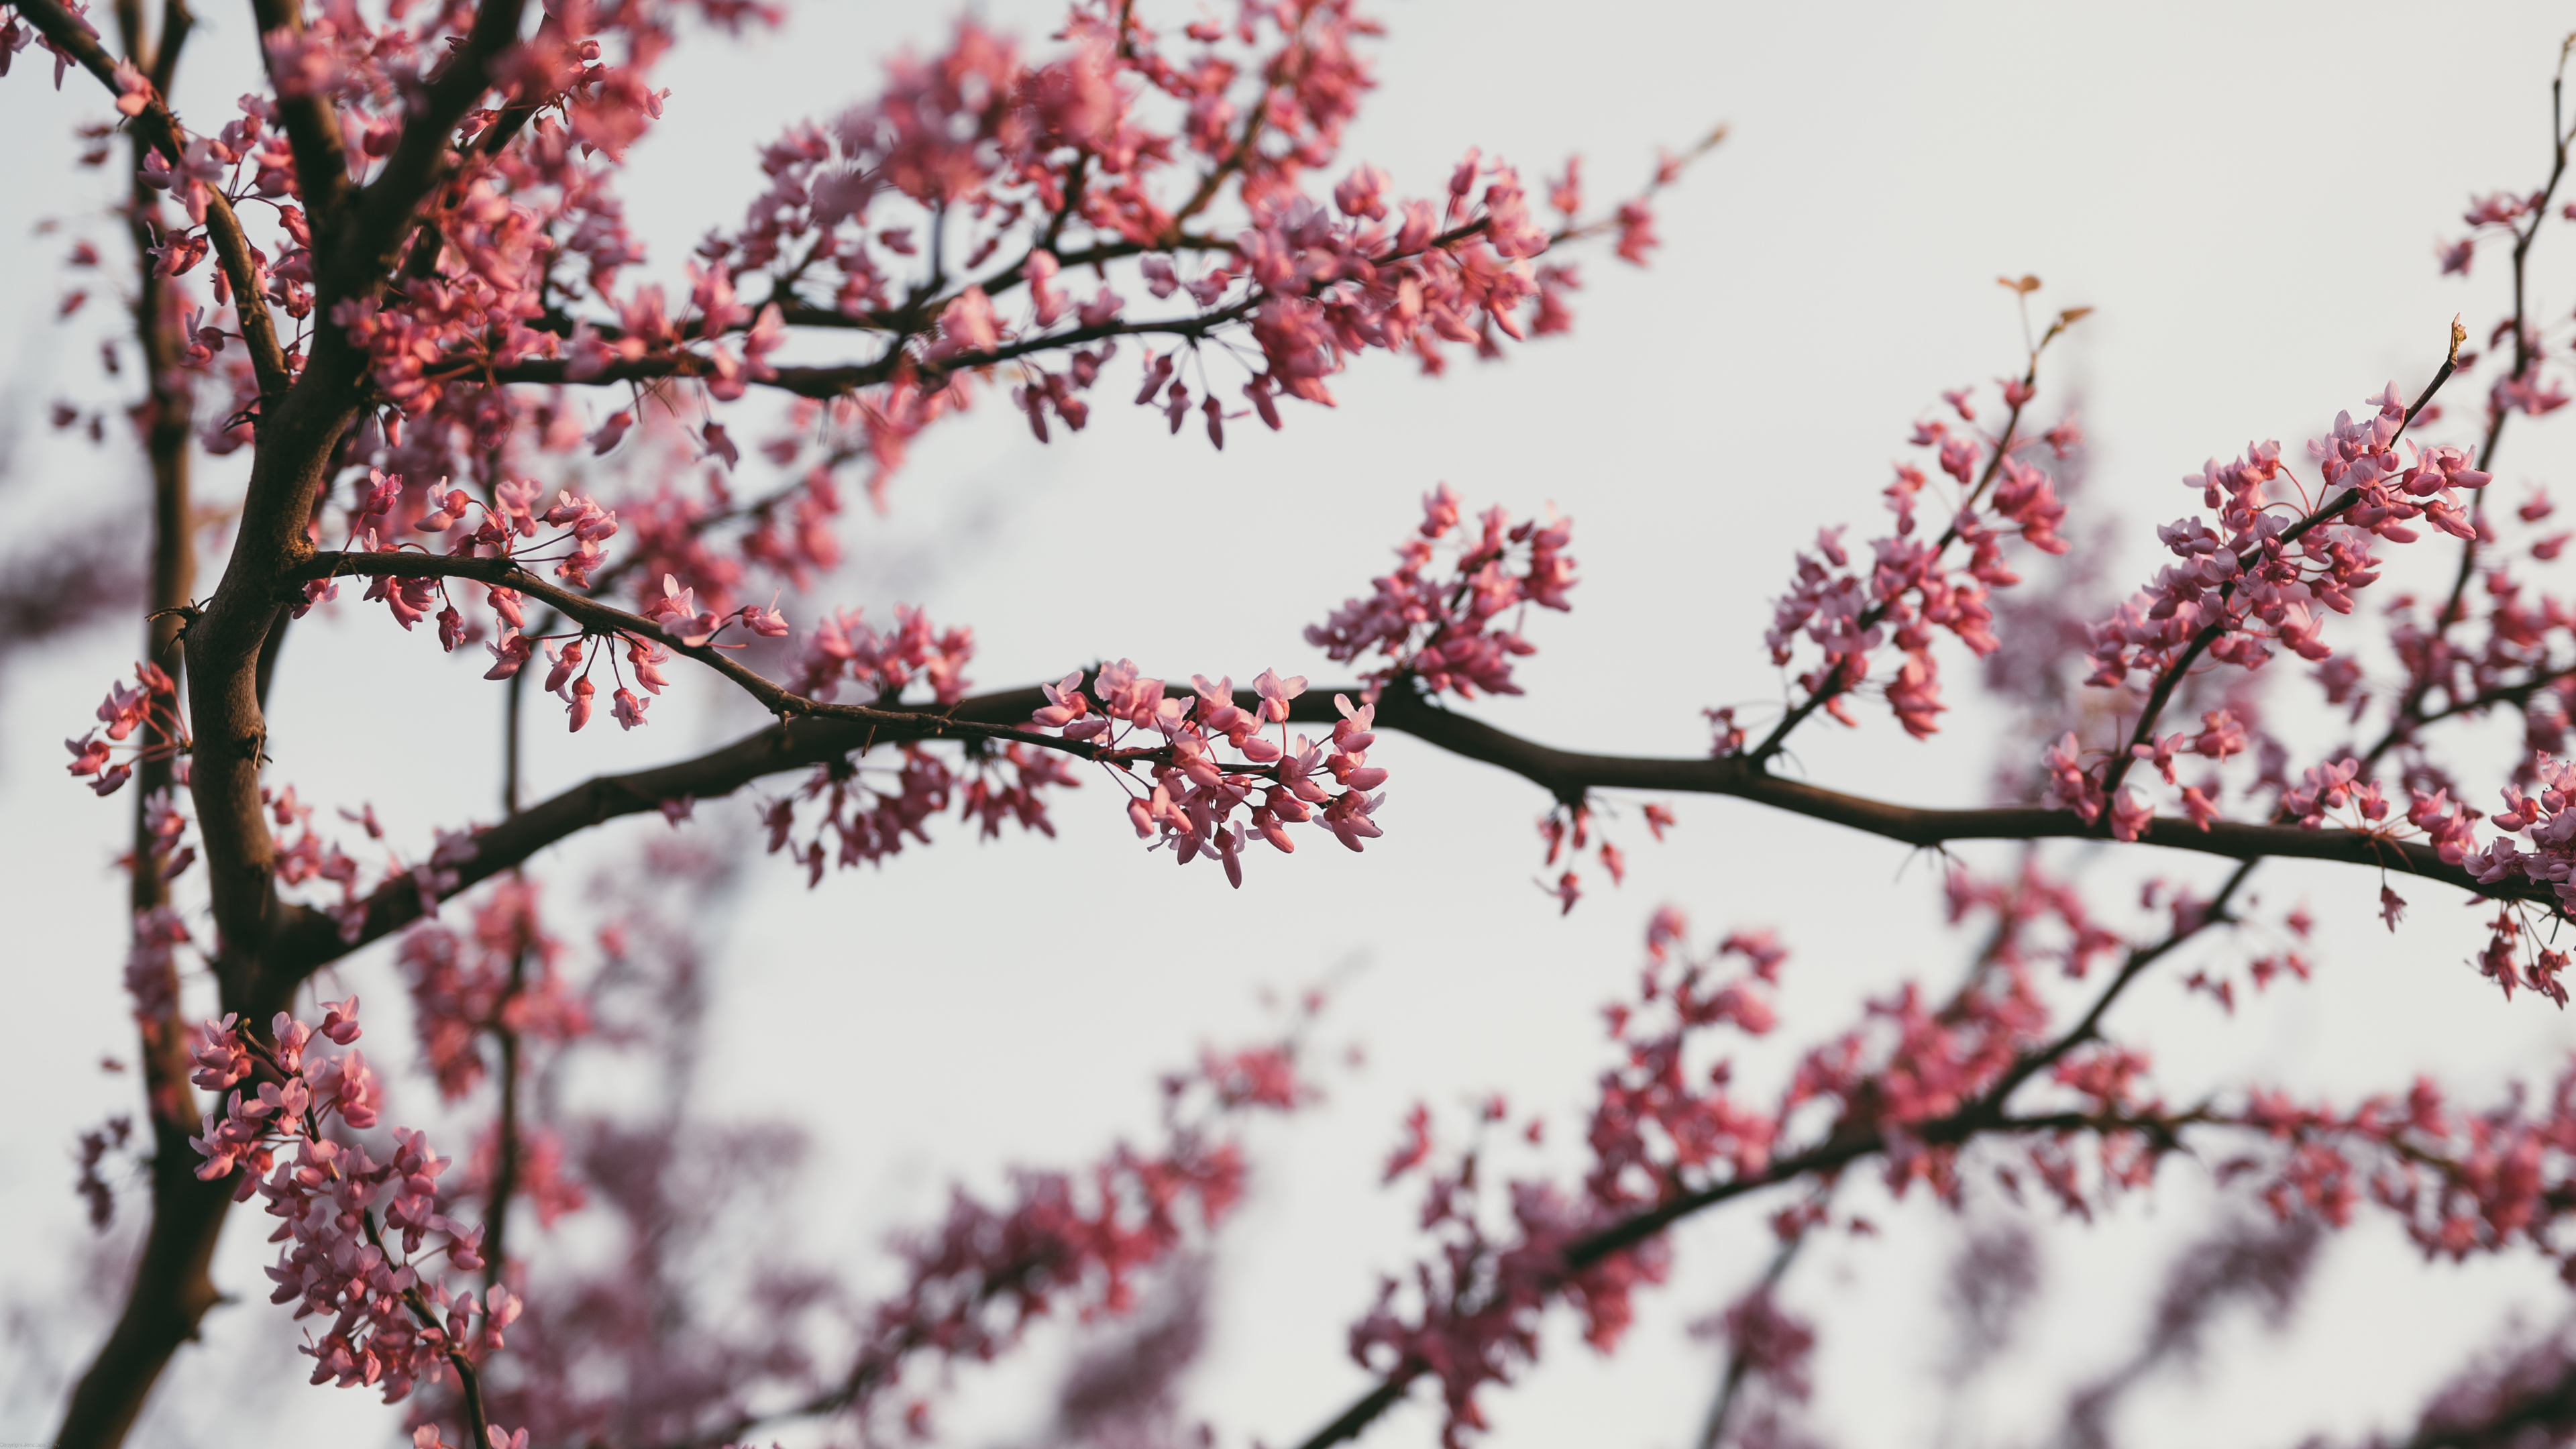 General 3840x2160 nature photography outdoors flowers pink flowers dusk spring trees branch bright oriental